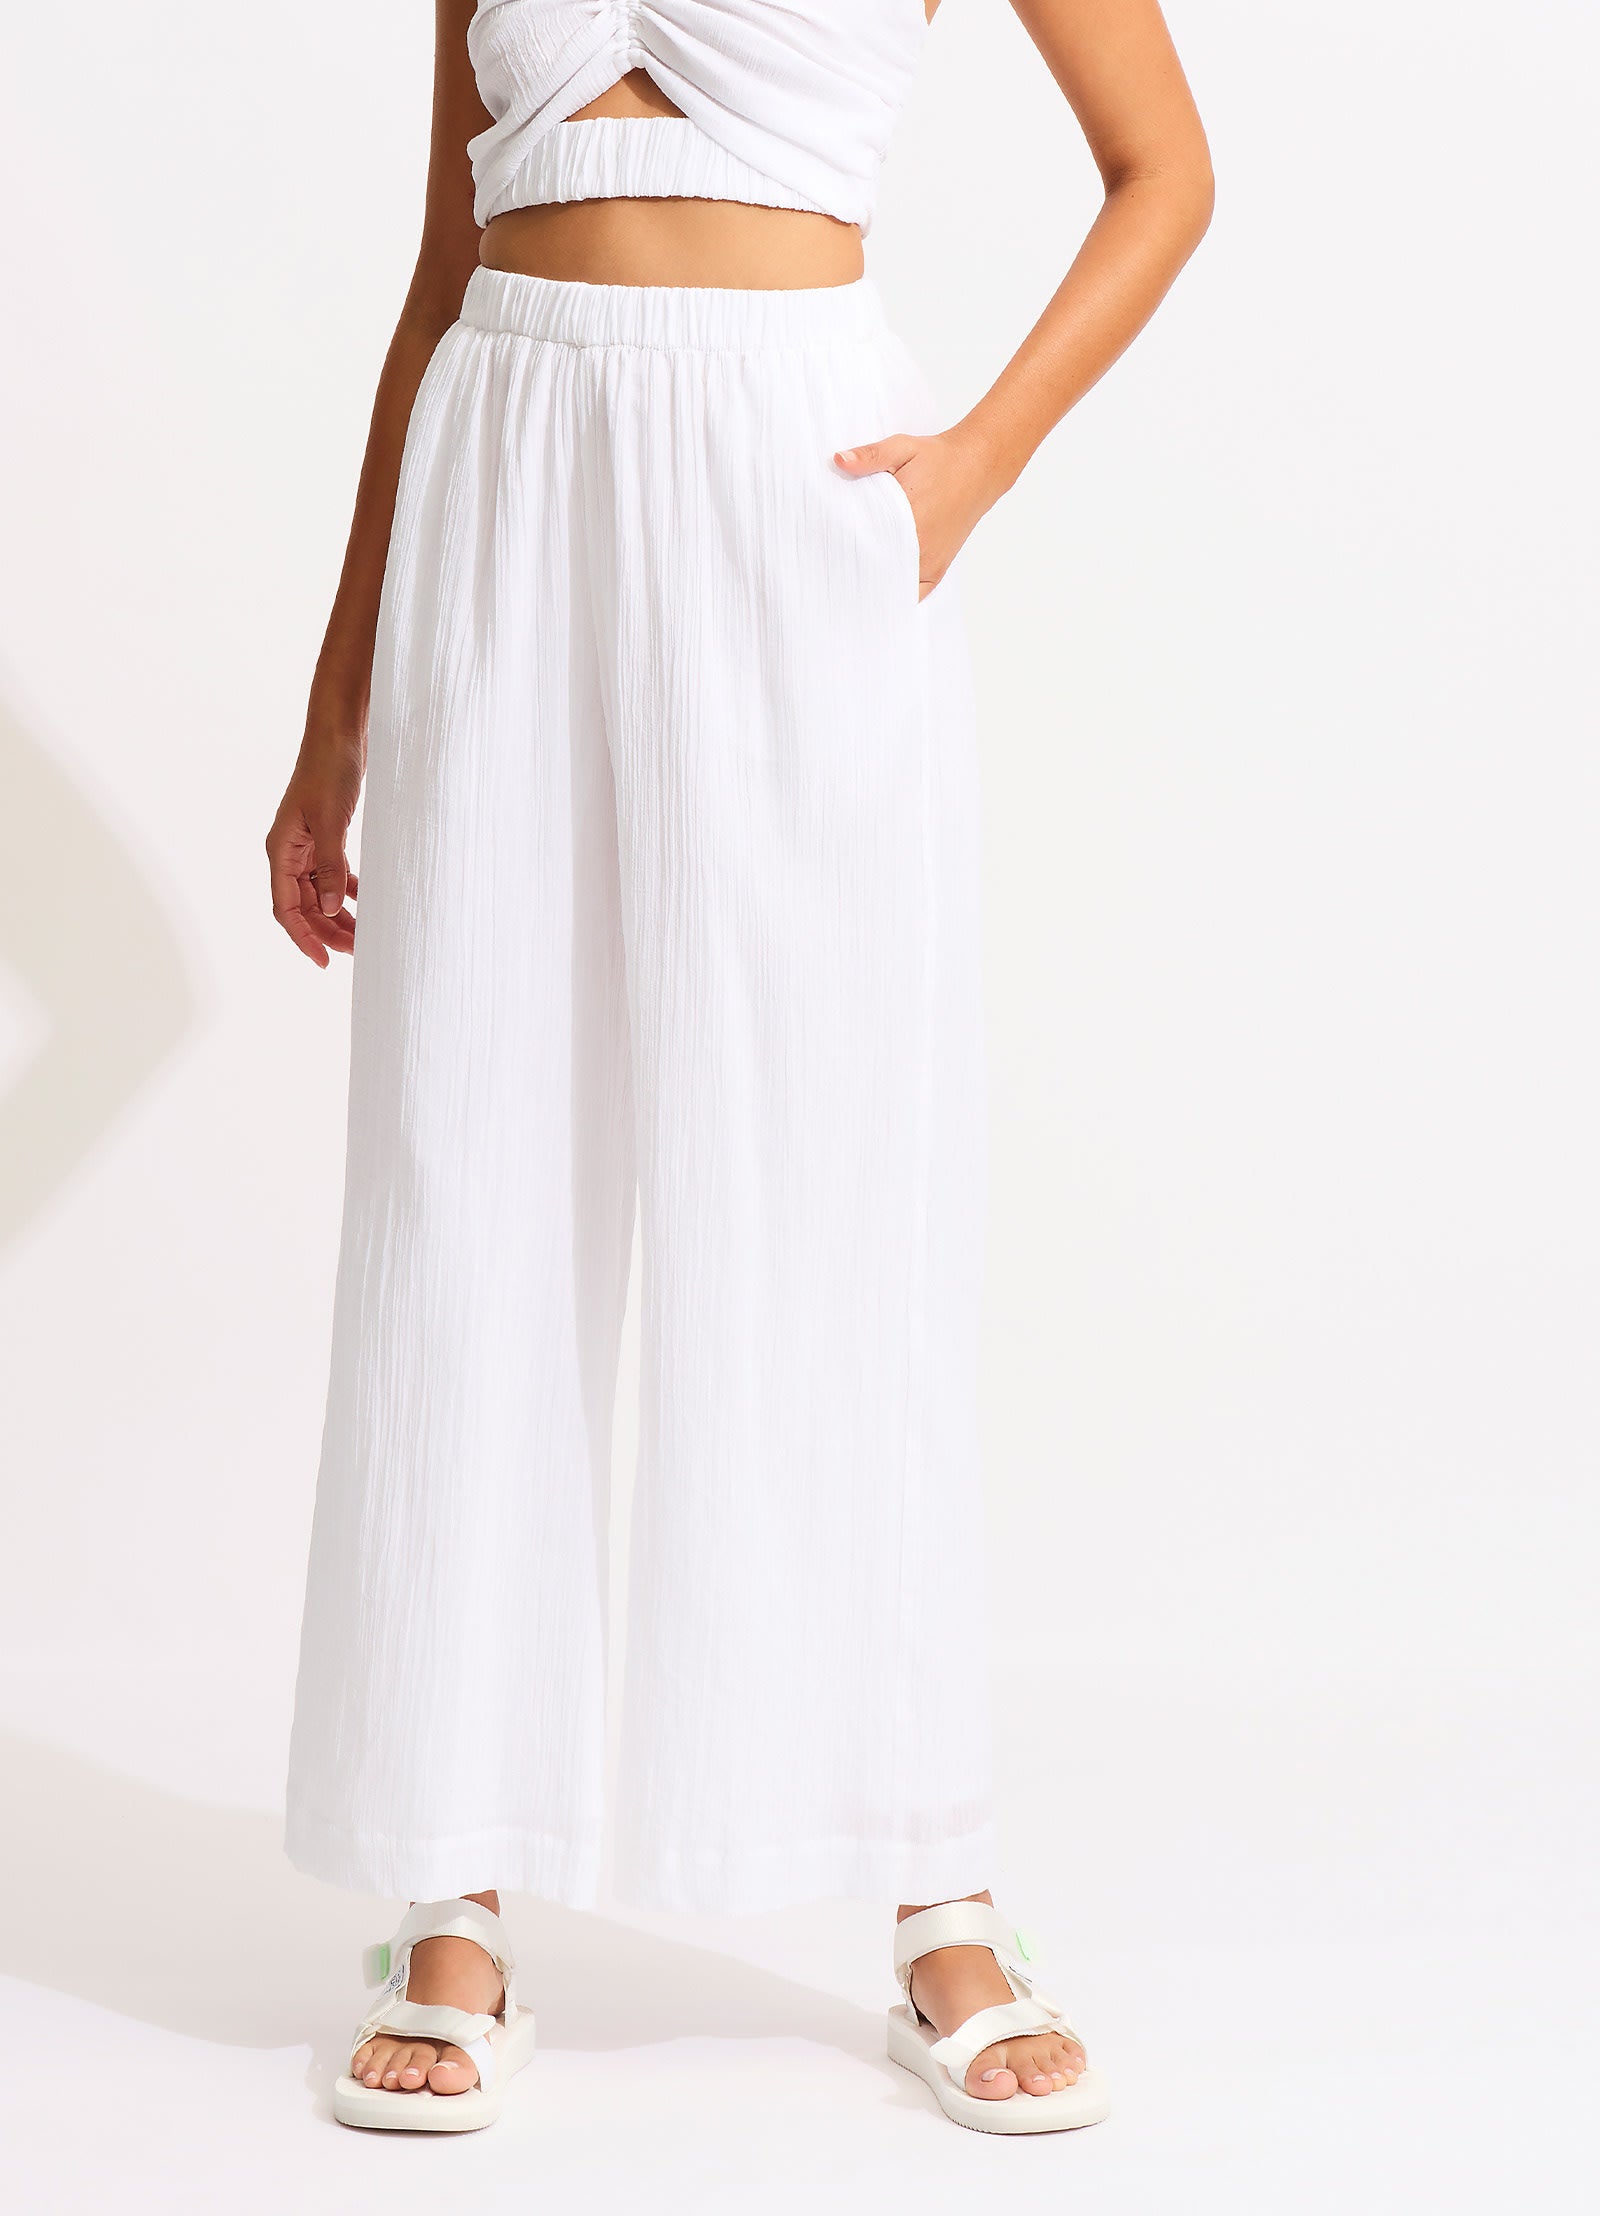 Esmee Exclusive sheer striped beach trousers in white | ASOS